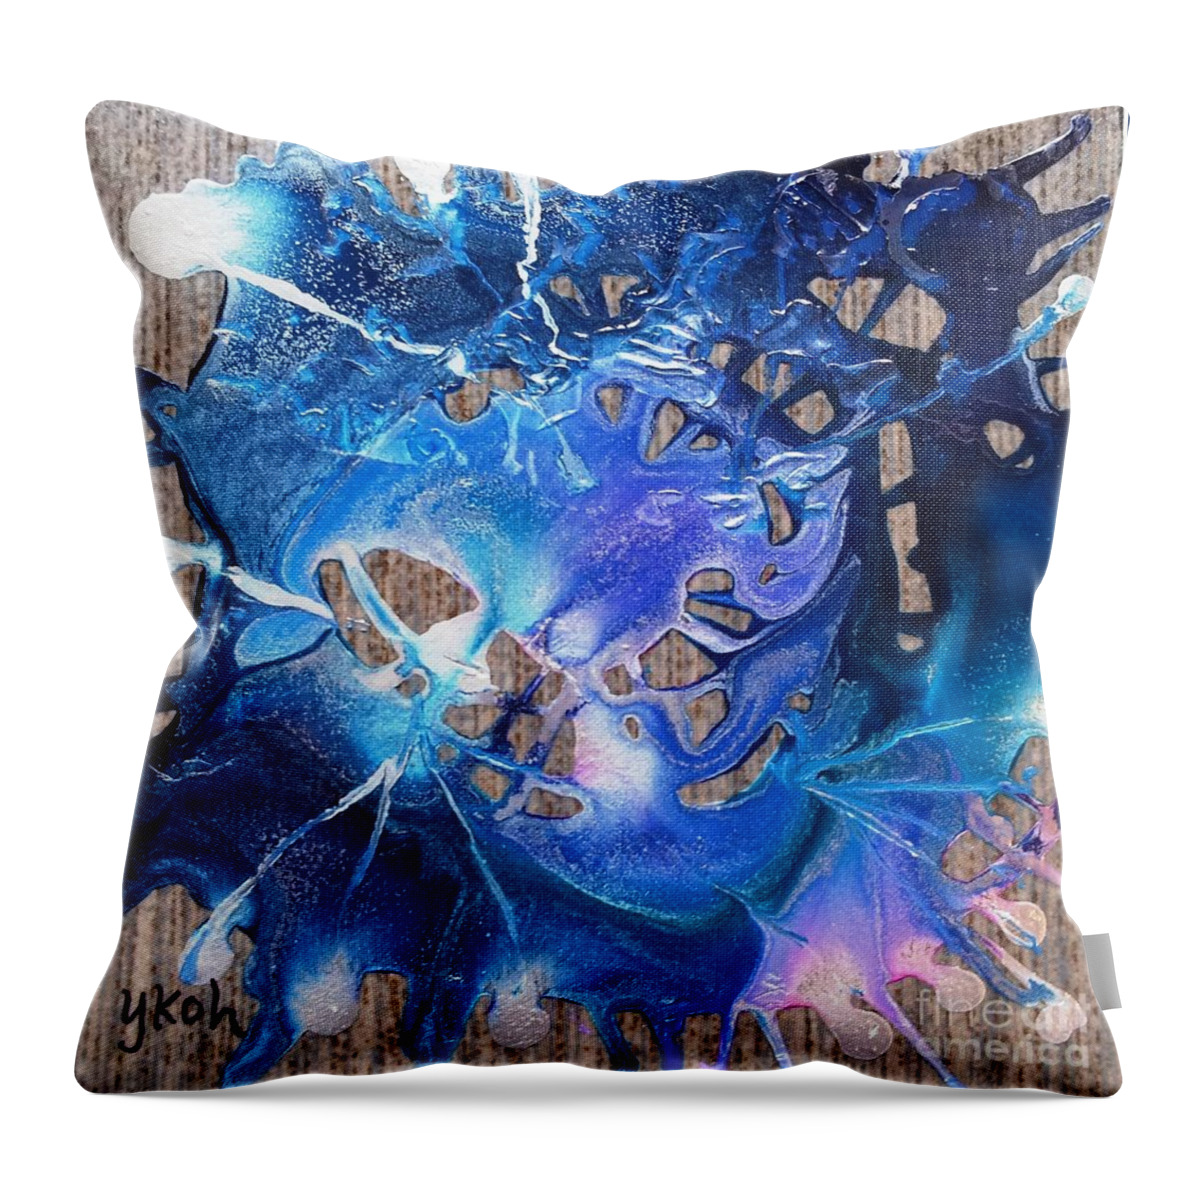 Alcohol Ink Art Throw Pillow featuring the painting Blue Starburst by Yolanda Koh